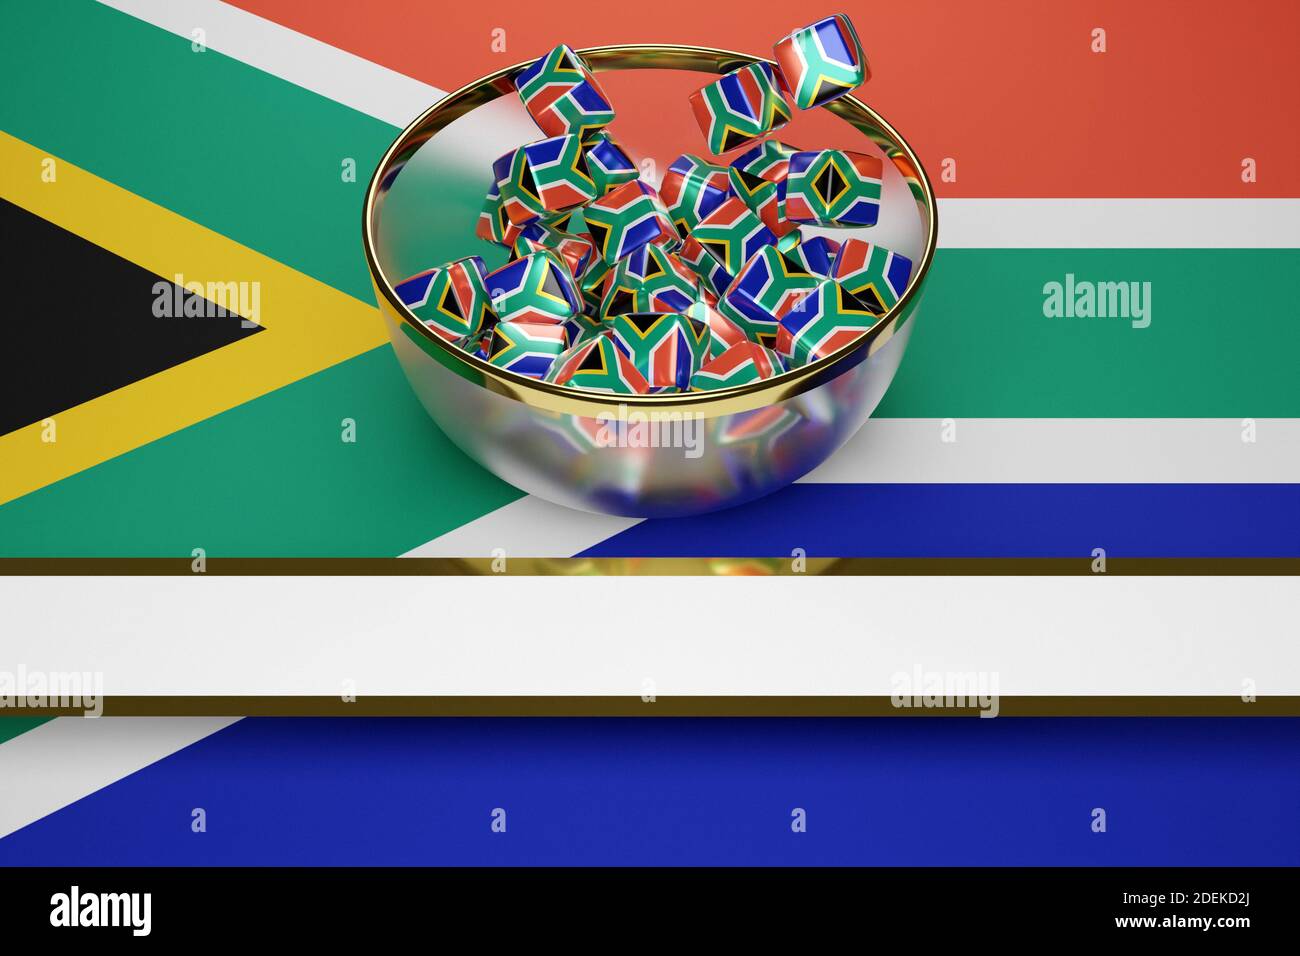 3D illustration in a beautiful transparent plate licks many identical cubes with the image of the national flag of South African Republic. The symbol Stock Photo